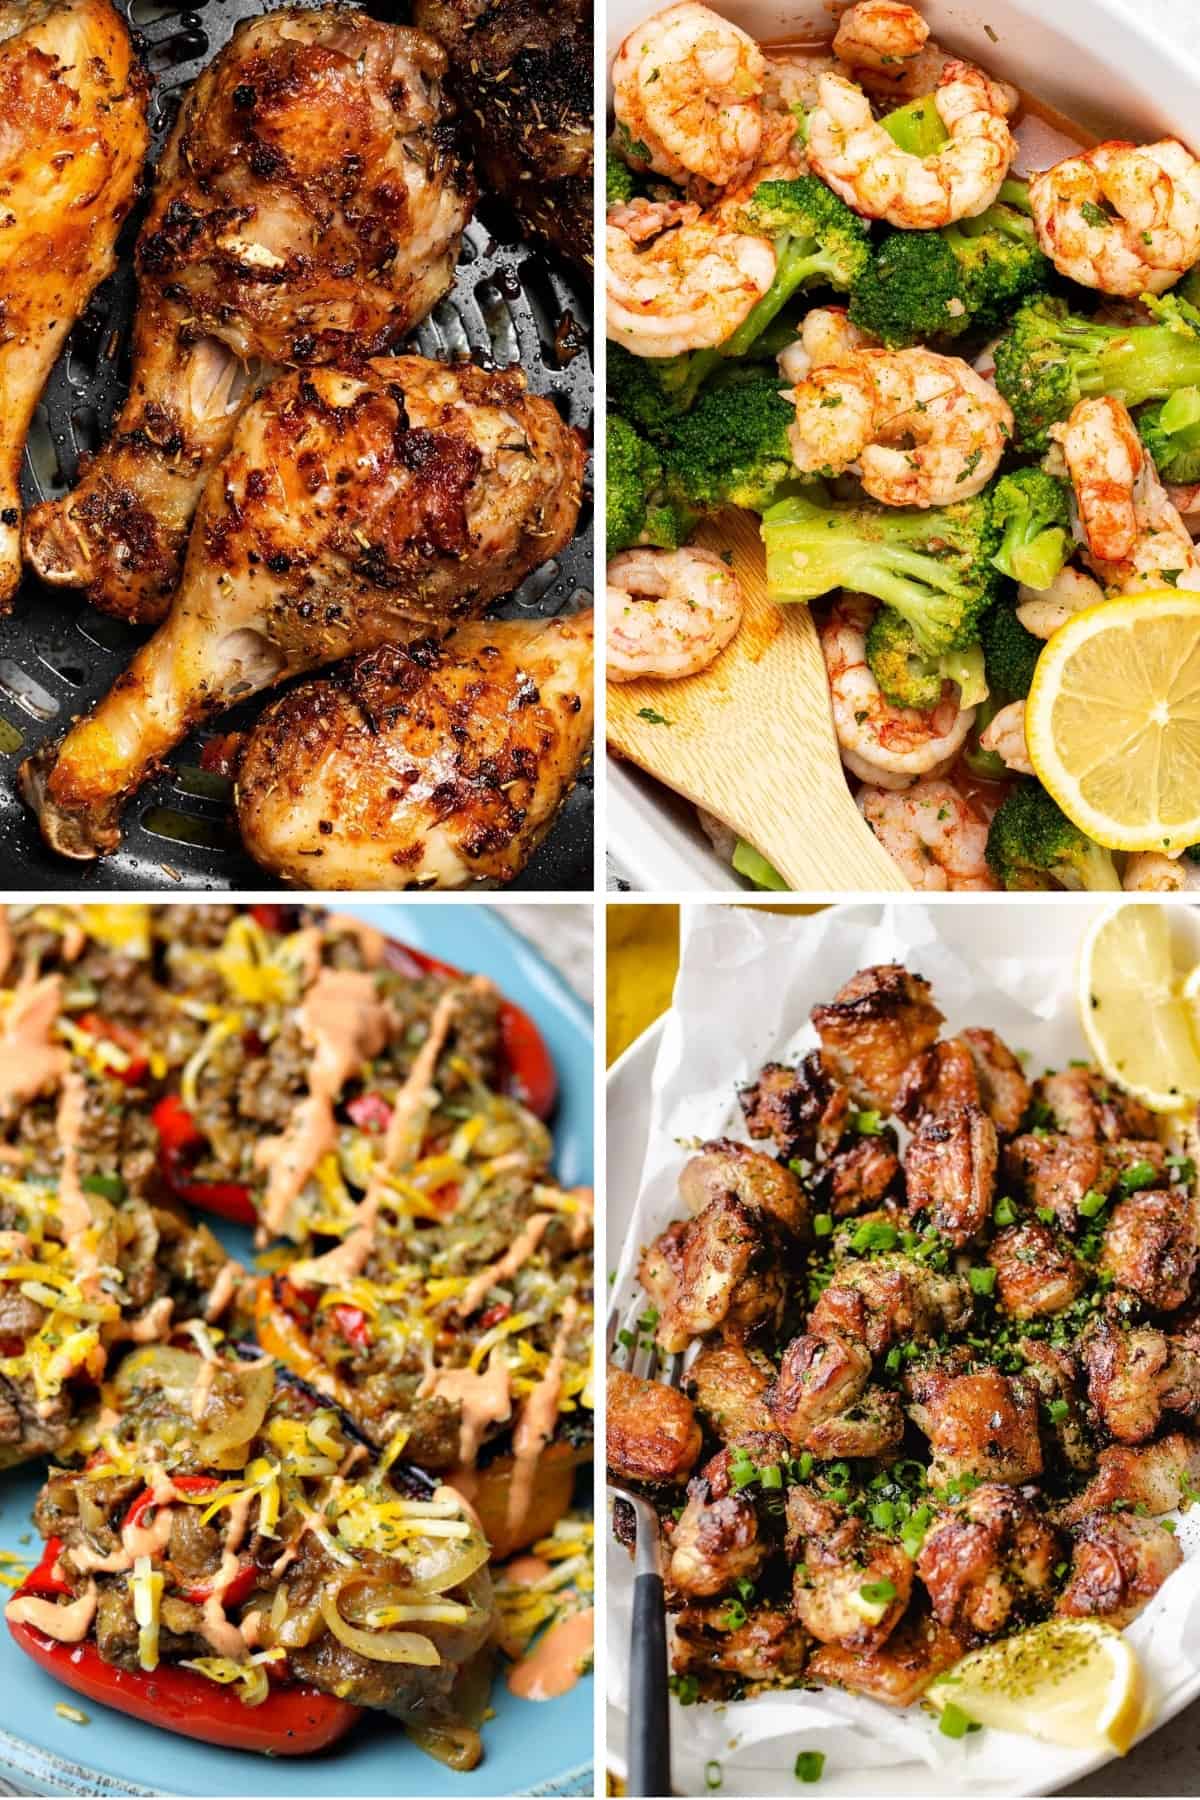 cheap keto meals like frozen shrimp and broccoli, lemon chicken thighs, roasted chicken legs, and stuffed peppers